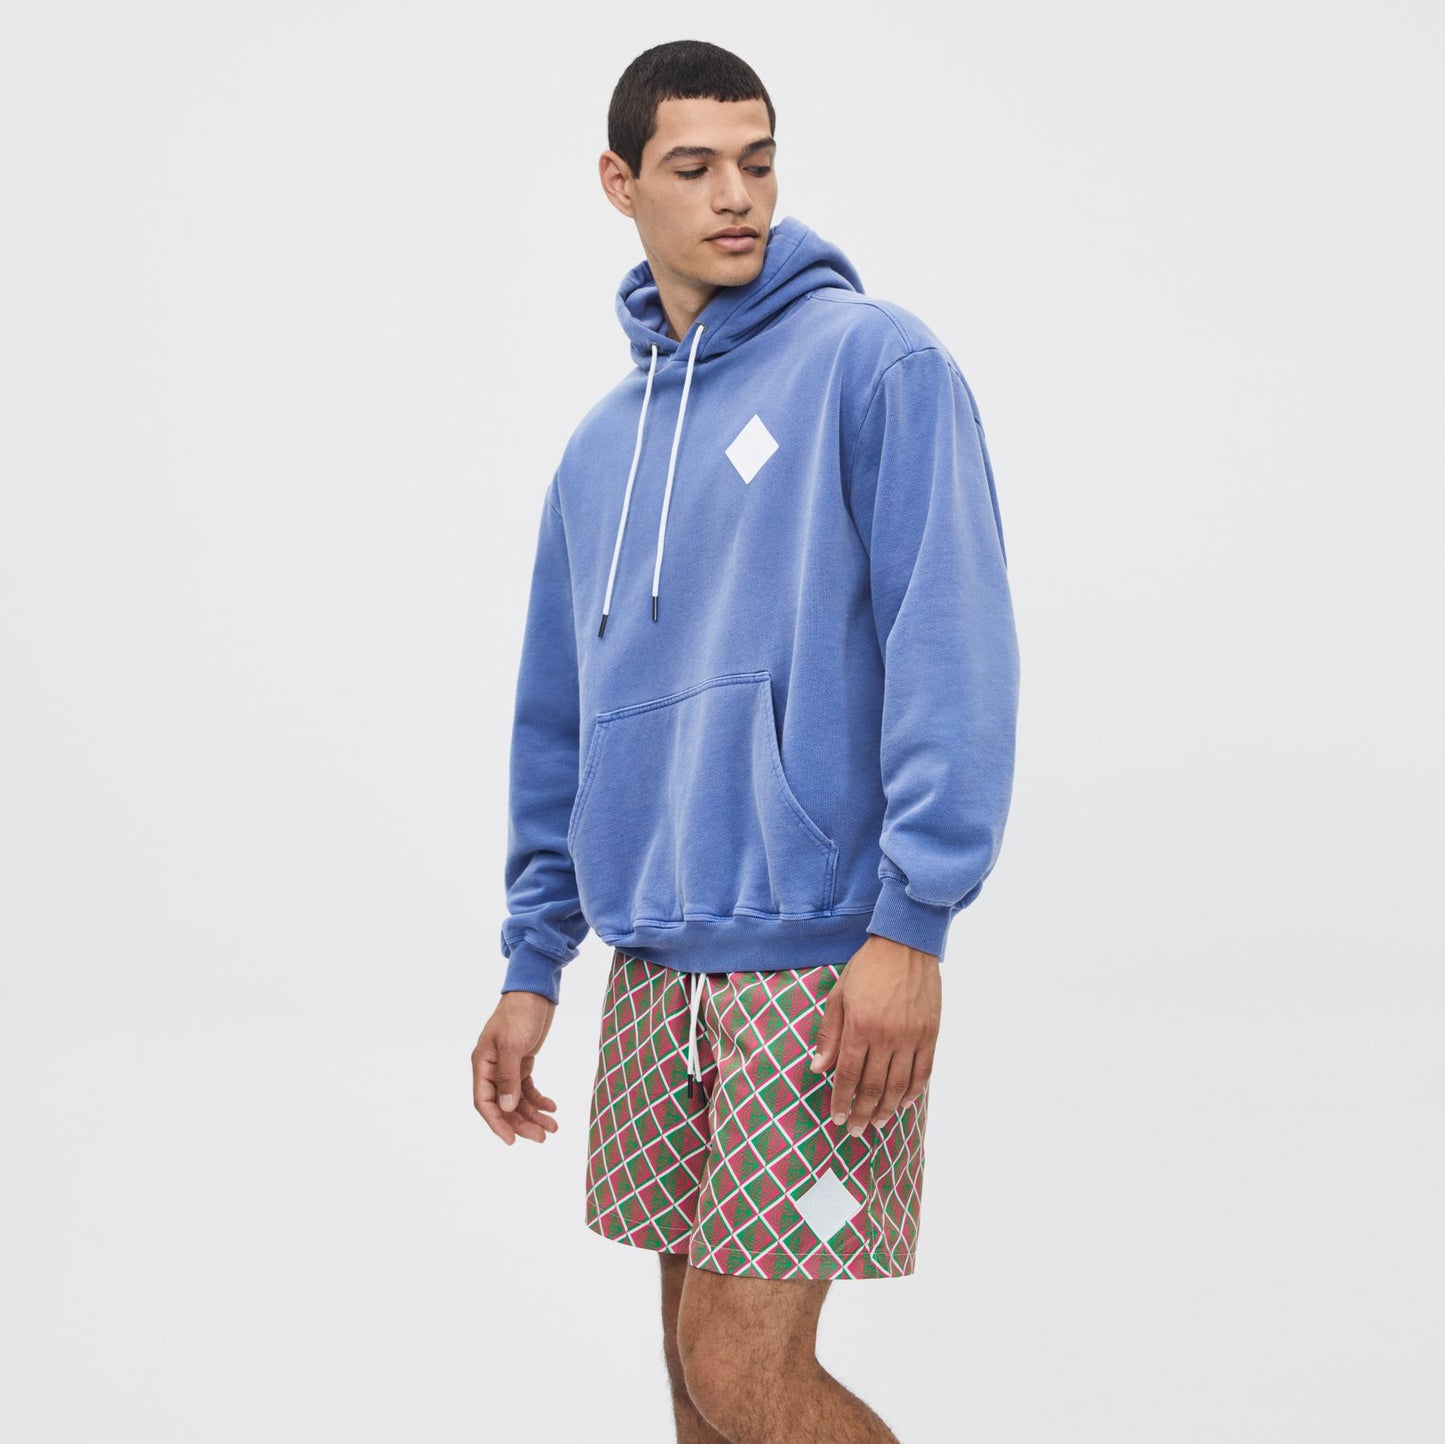 Concepts Vineyard Washed Hoodie (Washed Blue)